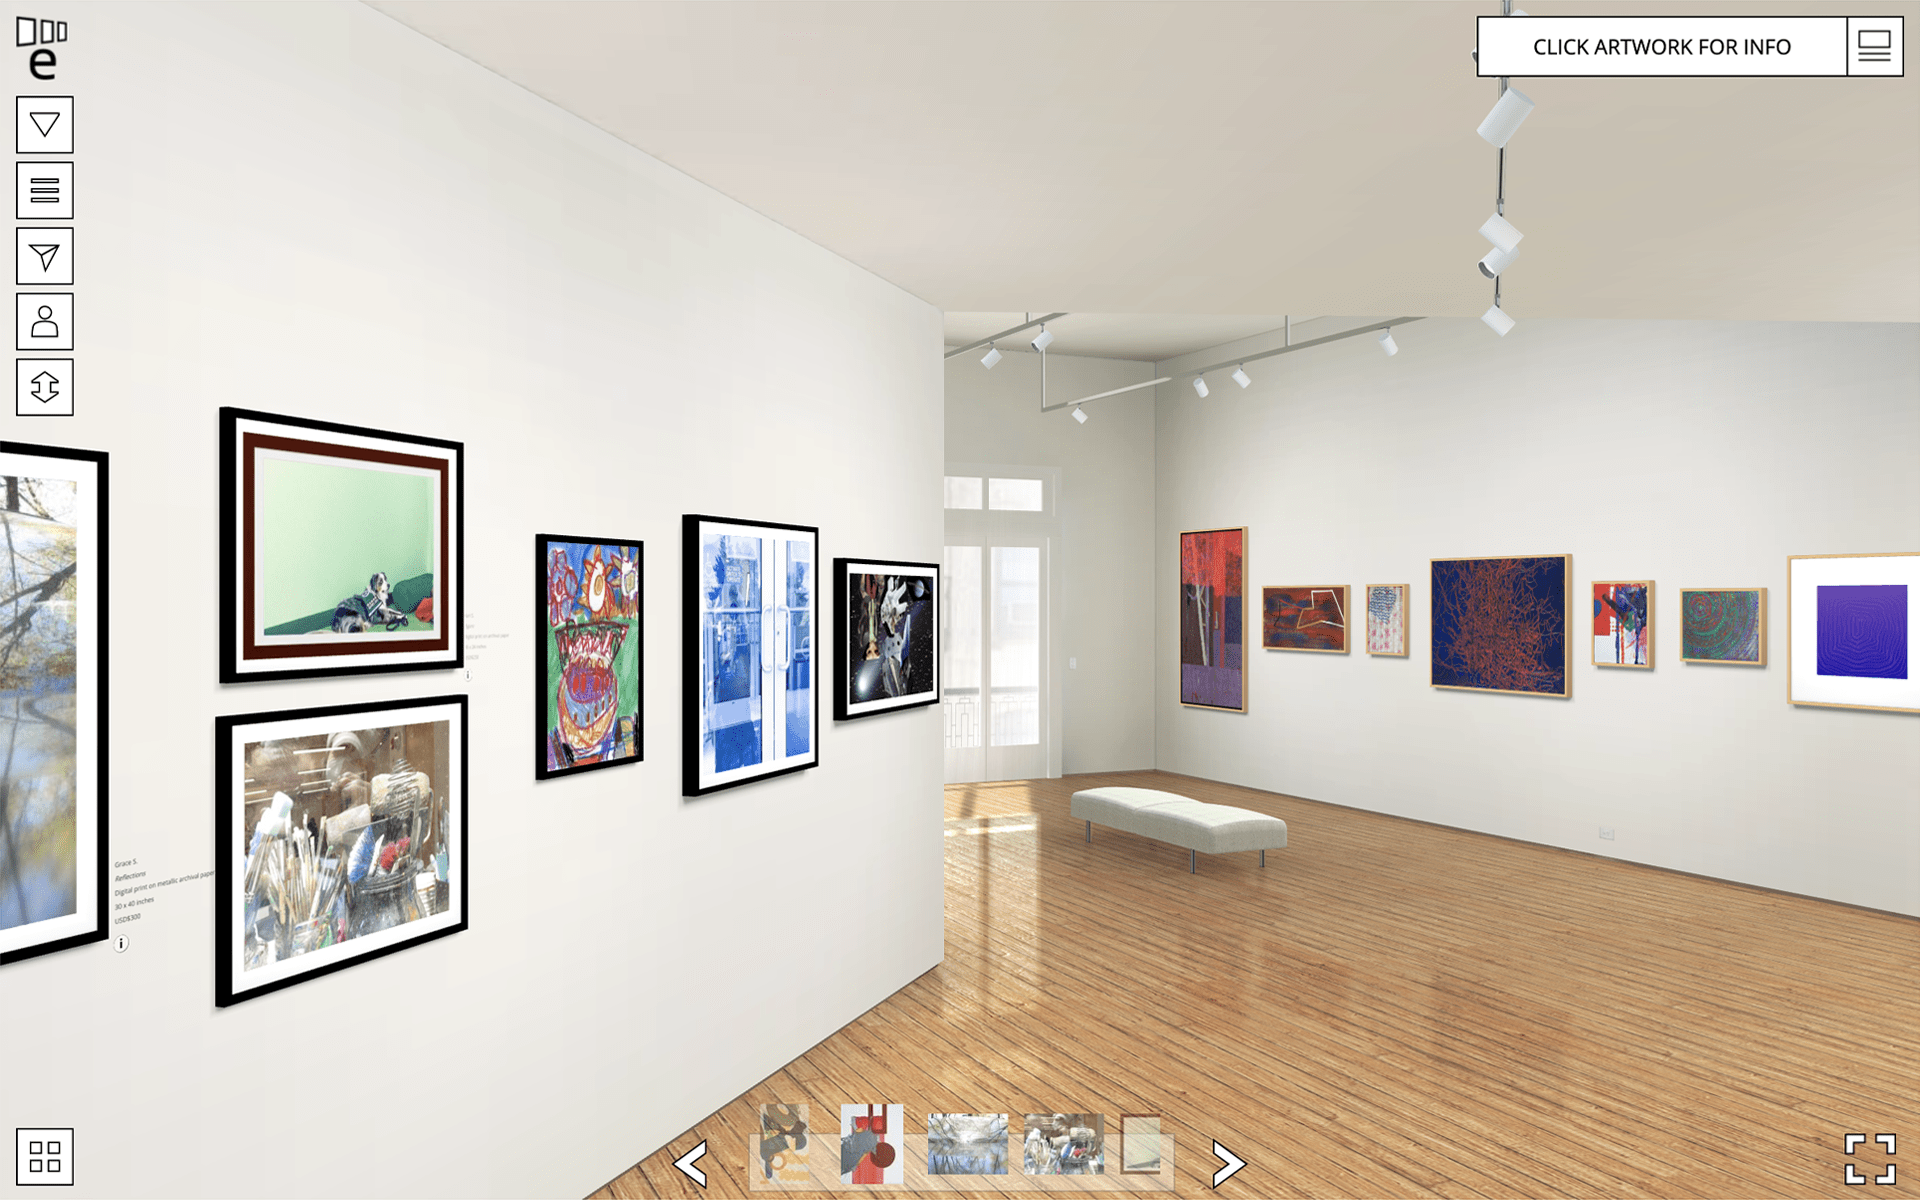 Virtual gallery with paintings exhibited at Rutgers NJMS Collaborative ARTS Exhibit in 2022.